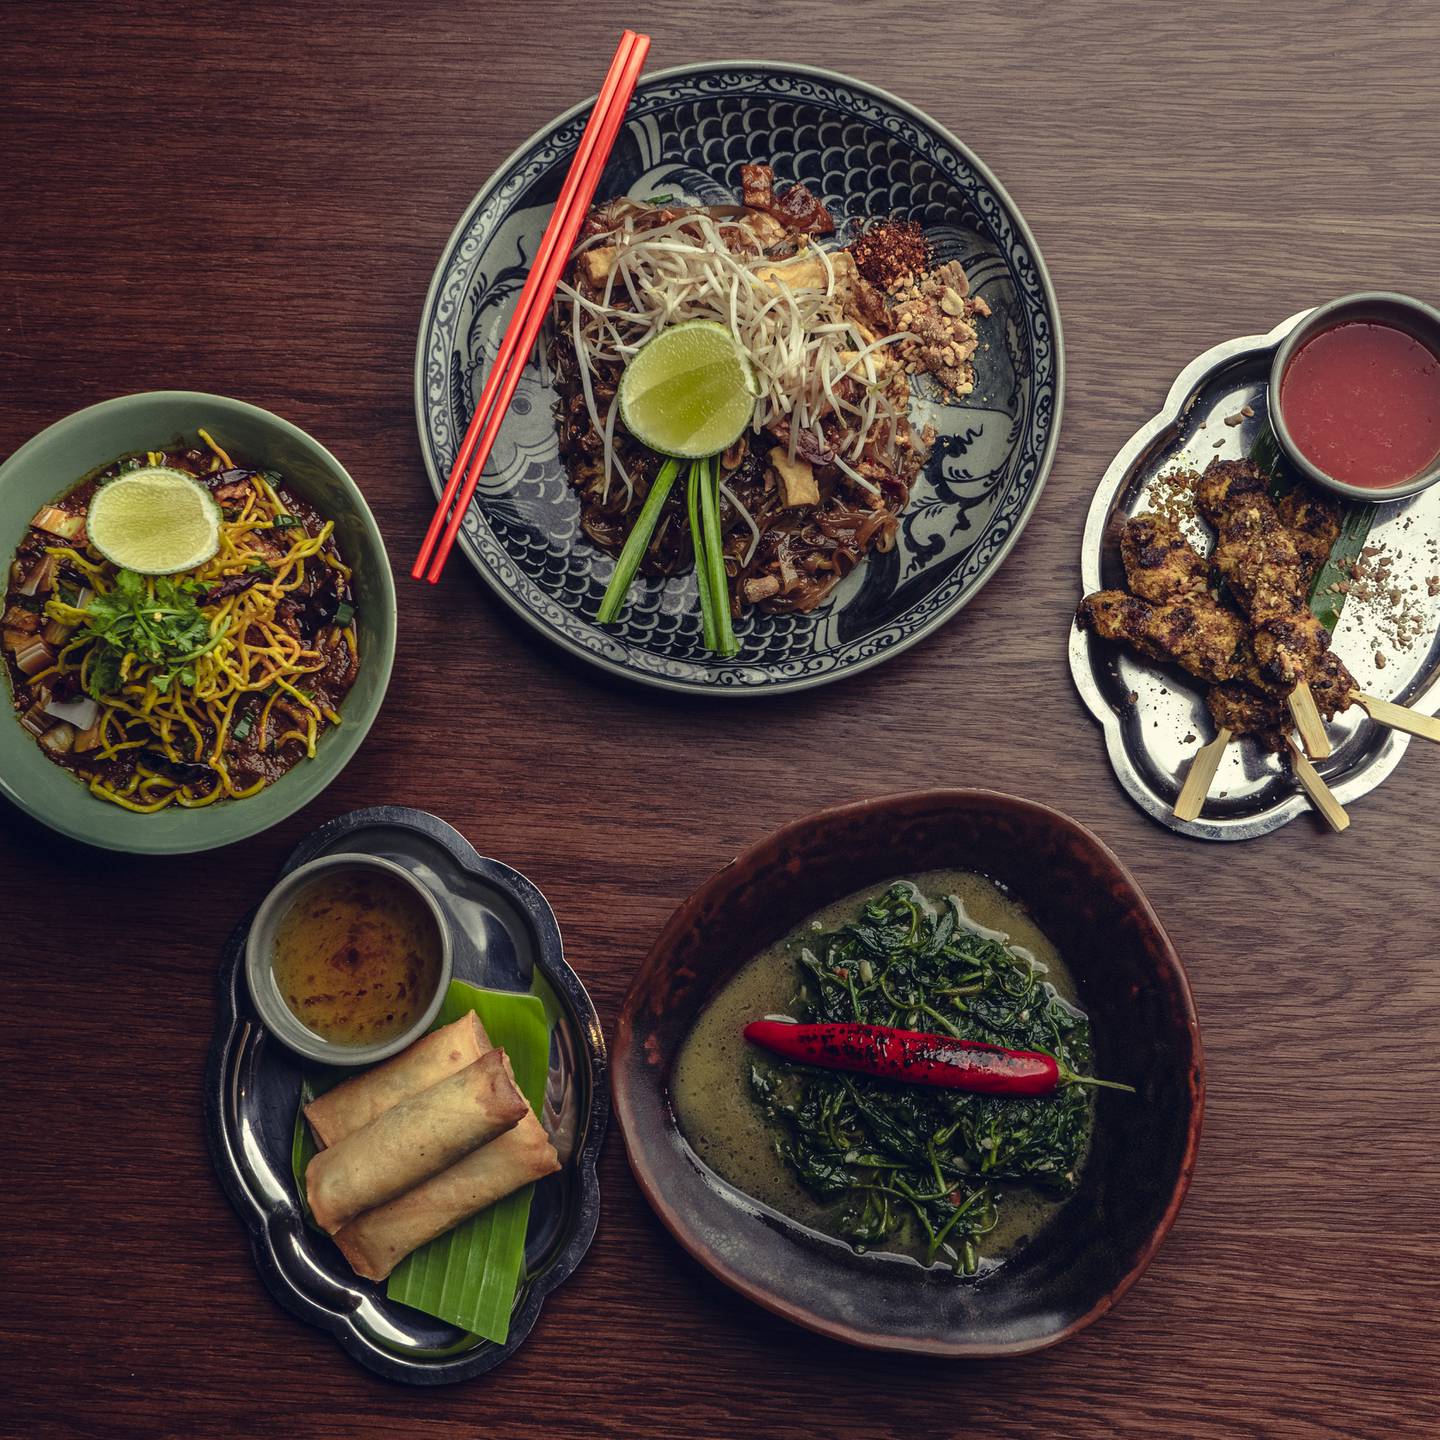 Thompson wants to prove that Thai cuisine is about more than 'just red and green curry'. Photo: Long Chim